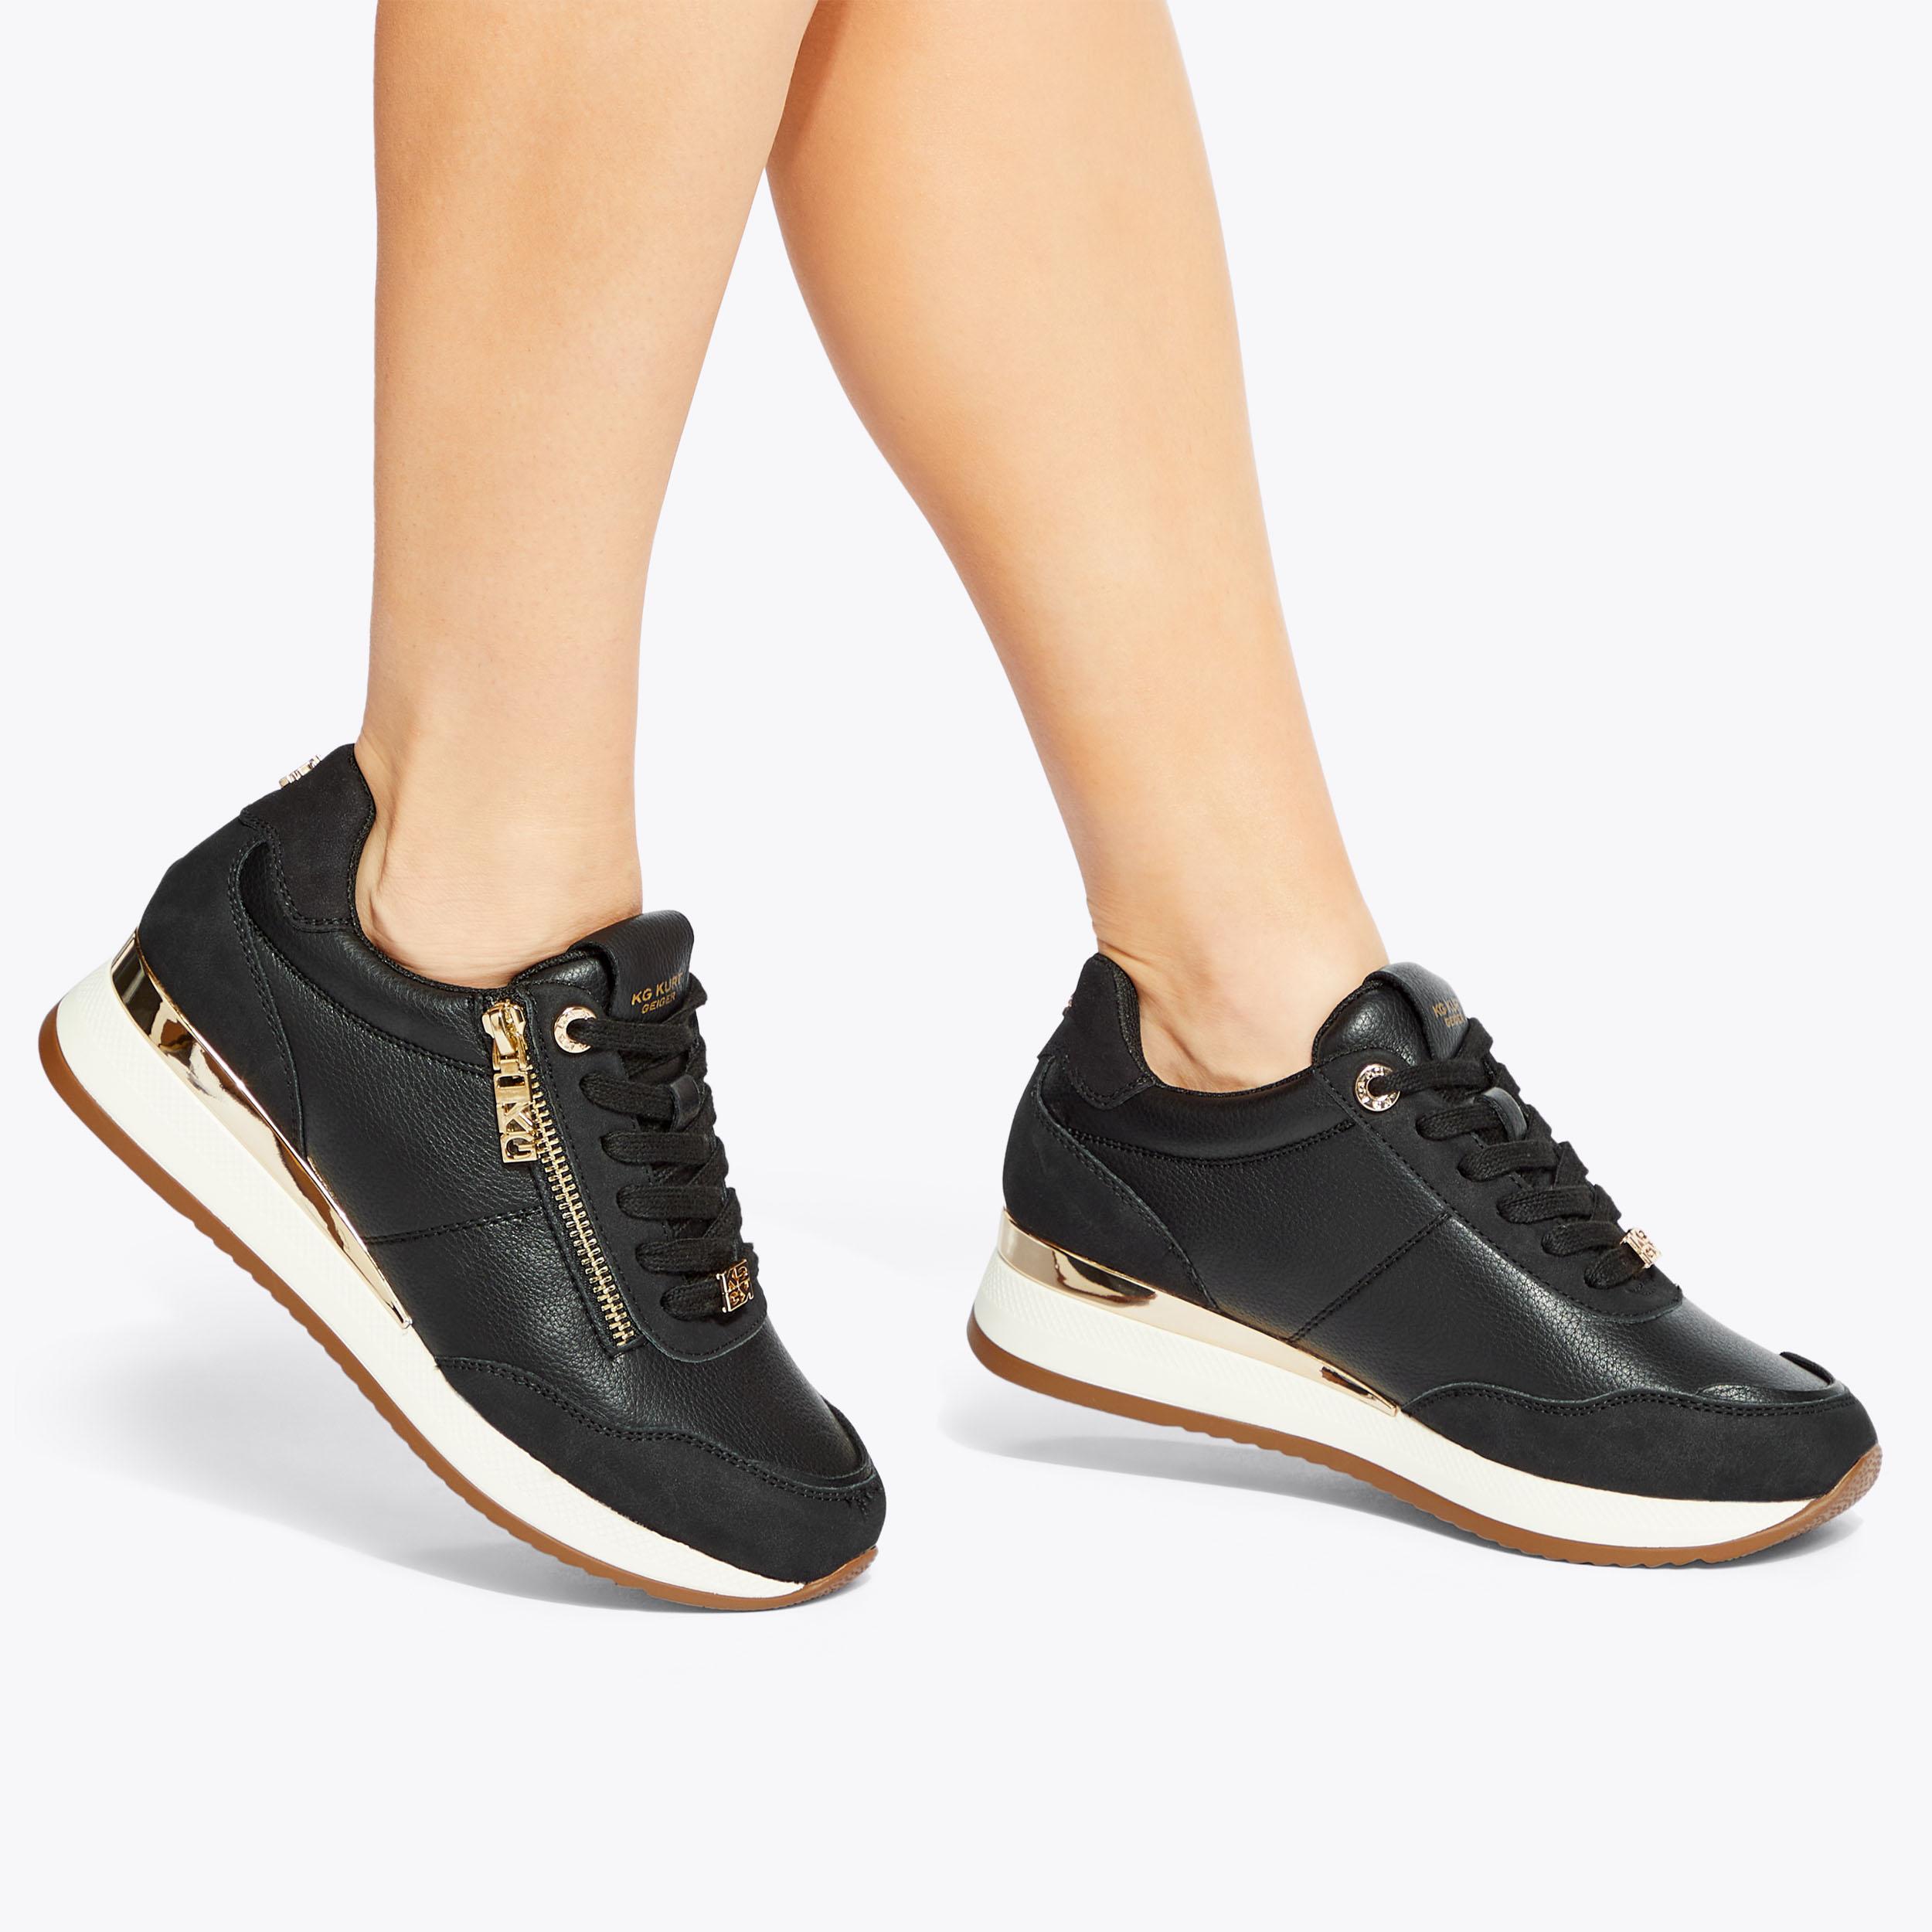 LINA Black lace up trainers by KG KURT GEIGER